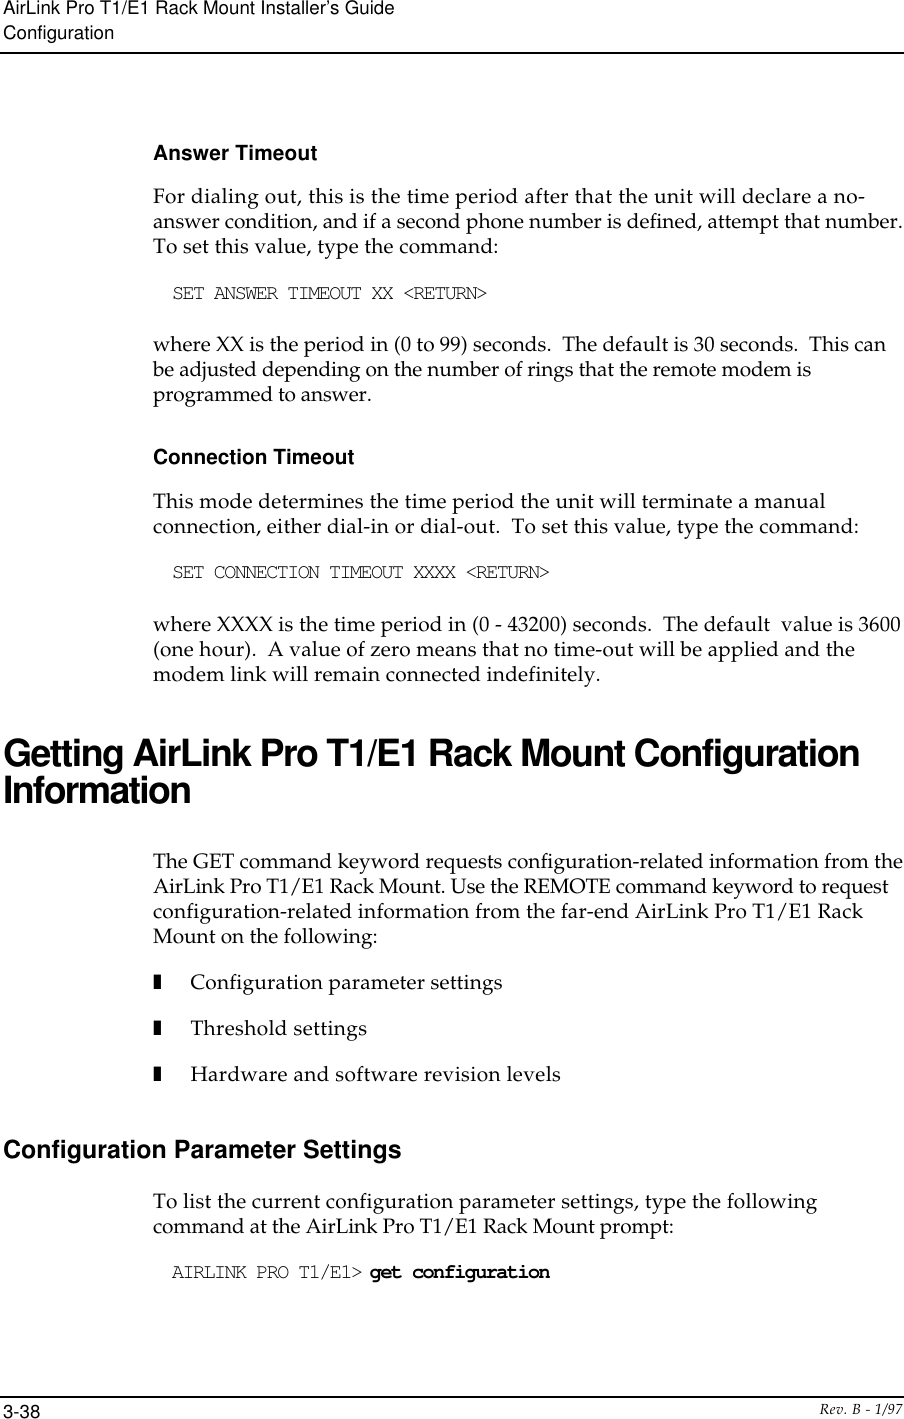 AirLink Pro T1/E1 Rack Mount Installer’s GuideConfigurationRev. B - 1/973-38Answer TimeoutFor dialing out, this is the time period after that the unit will declare a no-answer condition, and if a second phone number is defined, attempt that number.To set this value, type the command:SET ANSWER TIMEOUT XX &lt;RETURN&gt;where XX is the period in (0 to 99) seconds.  The default is 30 seconds.  This canbe adjusted depending on the number of rings that the remote modem isprogrammed to answer.Connection TimeoutThis mode determines the time period the unit will terminate a manualconnection, either dial-in or dial-out.  To set this value, type the command:SET CONNECTION TIMEOUT XXXX &lt;RETURN&gt;where XXXX is the time period in (0 - 43200) seconds.  The default  value is 3600(one hour).  A value of zero means that no time-out will be applied and themodem link will remain connected indefinitely.Getting AirLink Pro T1/E1 Rack Mount ConfigurationInformationThe GET command keyword requests configuration-related information from theAirLink Pro T1/E1 Rack Mount. Use the REMOTE command keyword to requestconfiguration-related information from the far-end AirLink Pro T1/E1 RackMount on the following:❚Configuration parameter settings❚Threshold settings❚Hardware and software revision levelsConfiguration Parameter SettingsTo list the current configuration parameter settings, type the followingcommand at the AirLink Pro T1/E1 Rack Mount prompt:AIRLINK PRO T1/E1&gt; get configuration